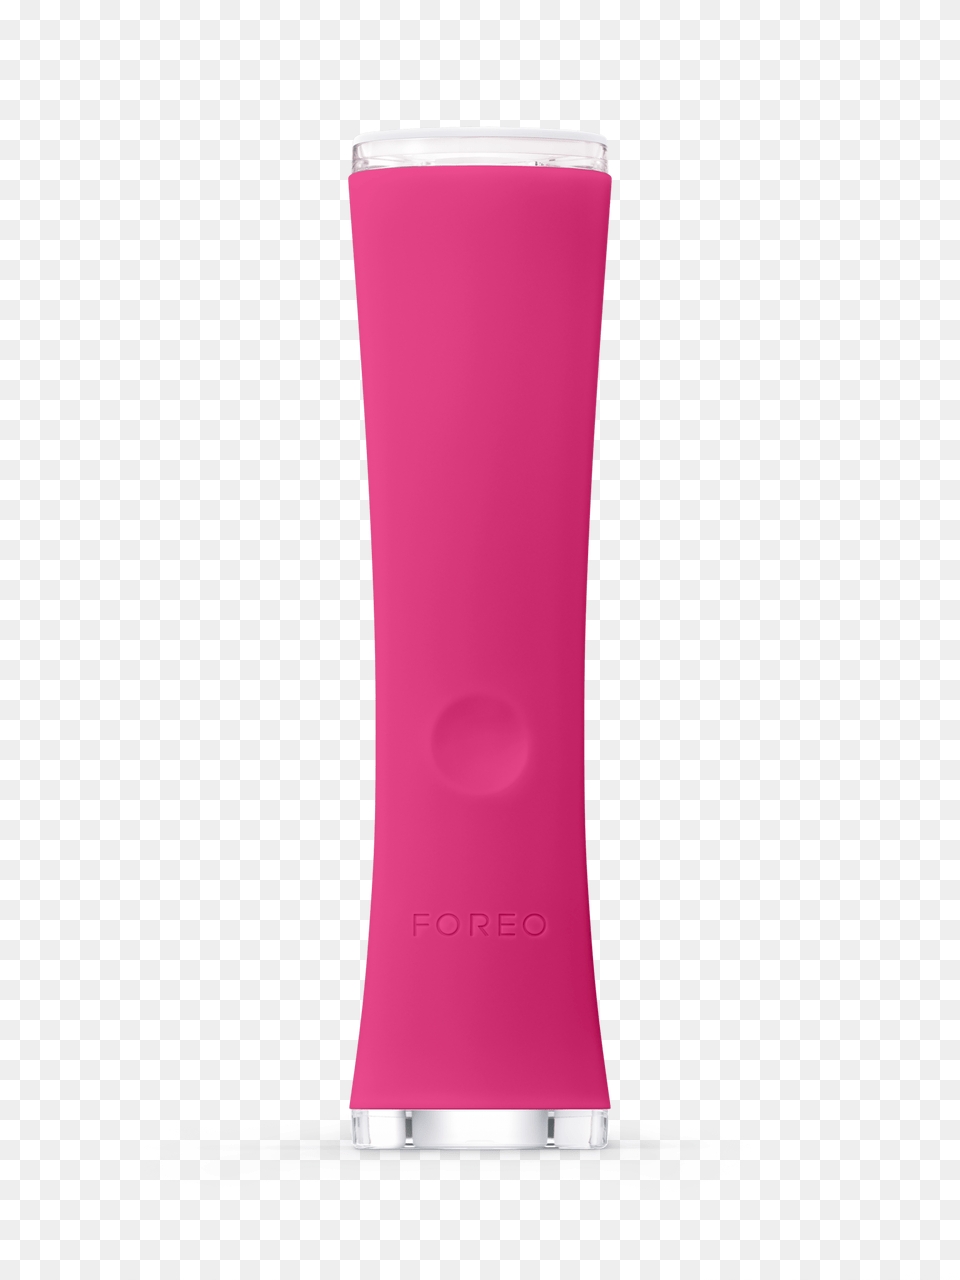 Foreo Espada Magenta, Alcohol, Beer, Beverage, Glass Free Png Download